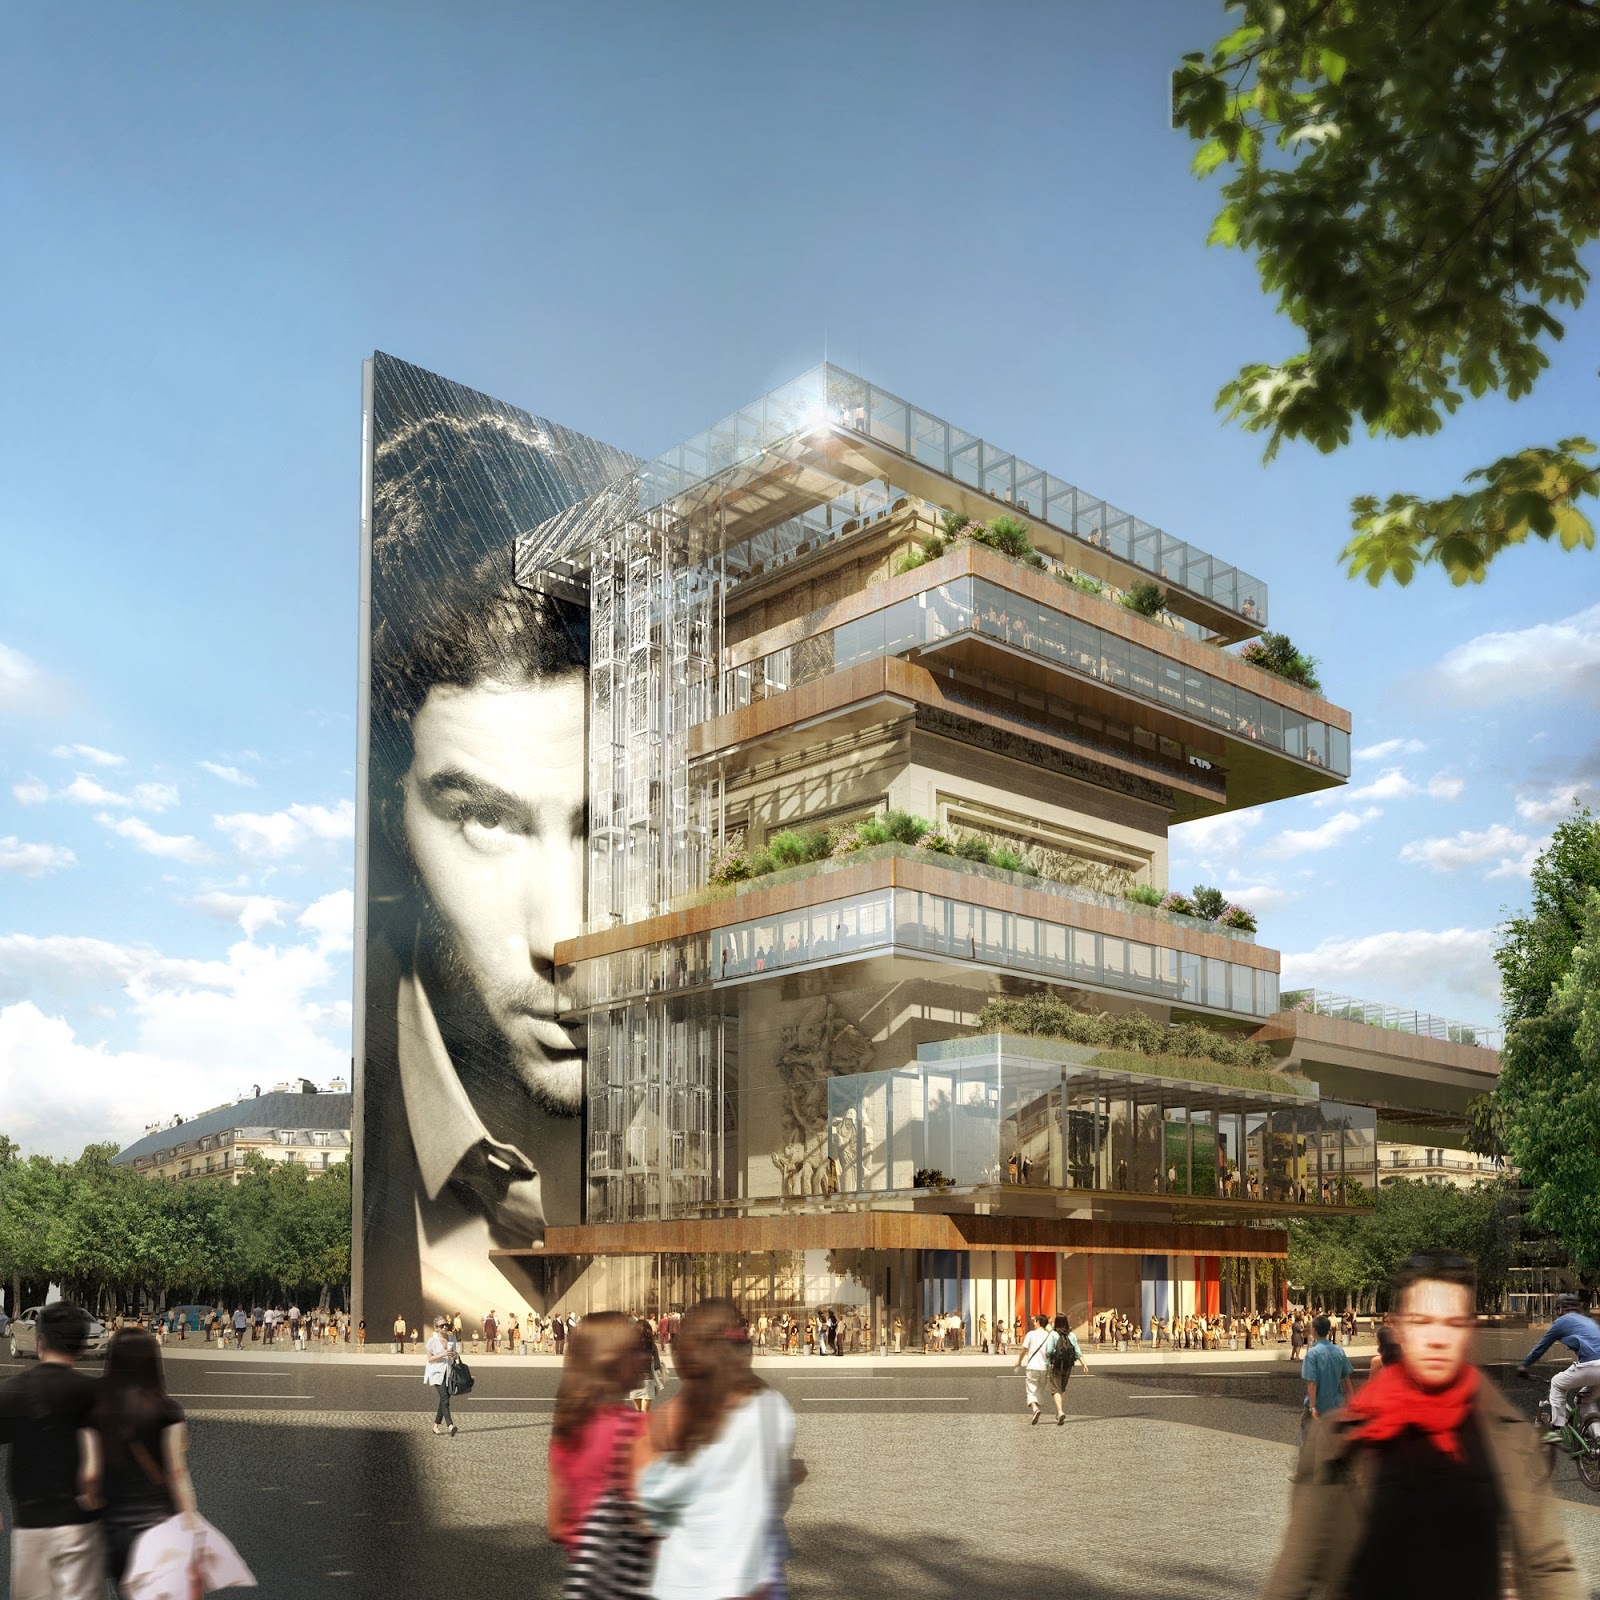 This Speculative Project Imagines A Mixed-Use Building Wrapped Around the Arc de Triomphe